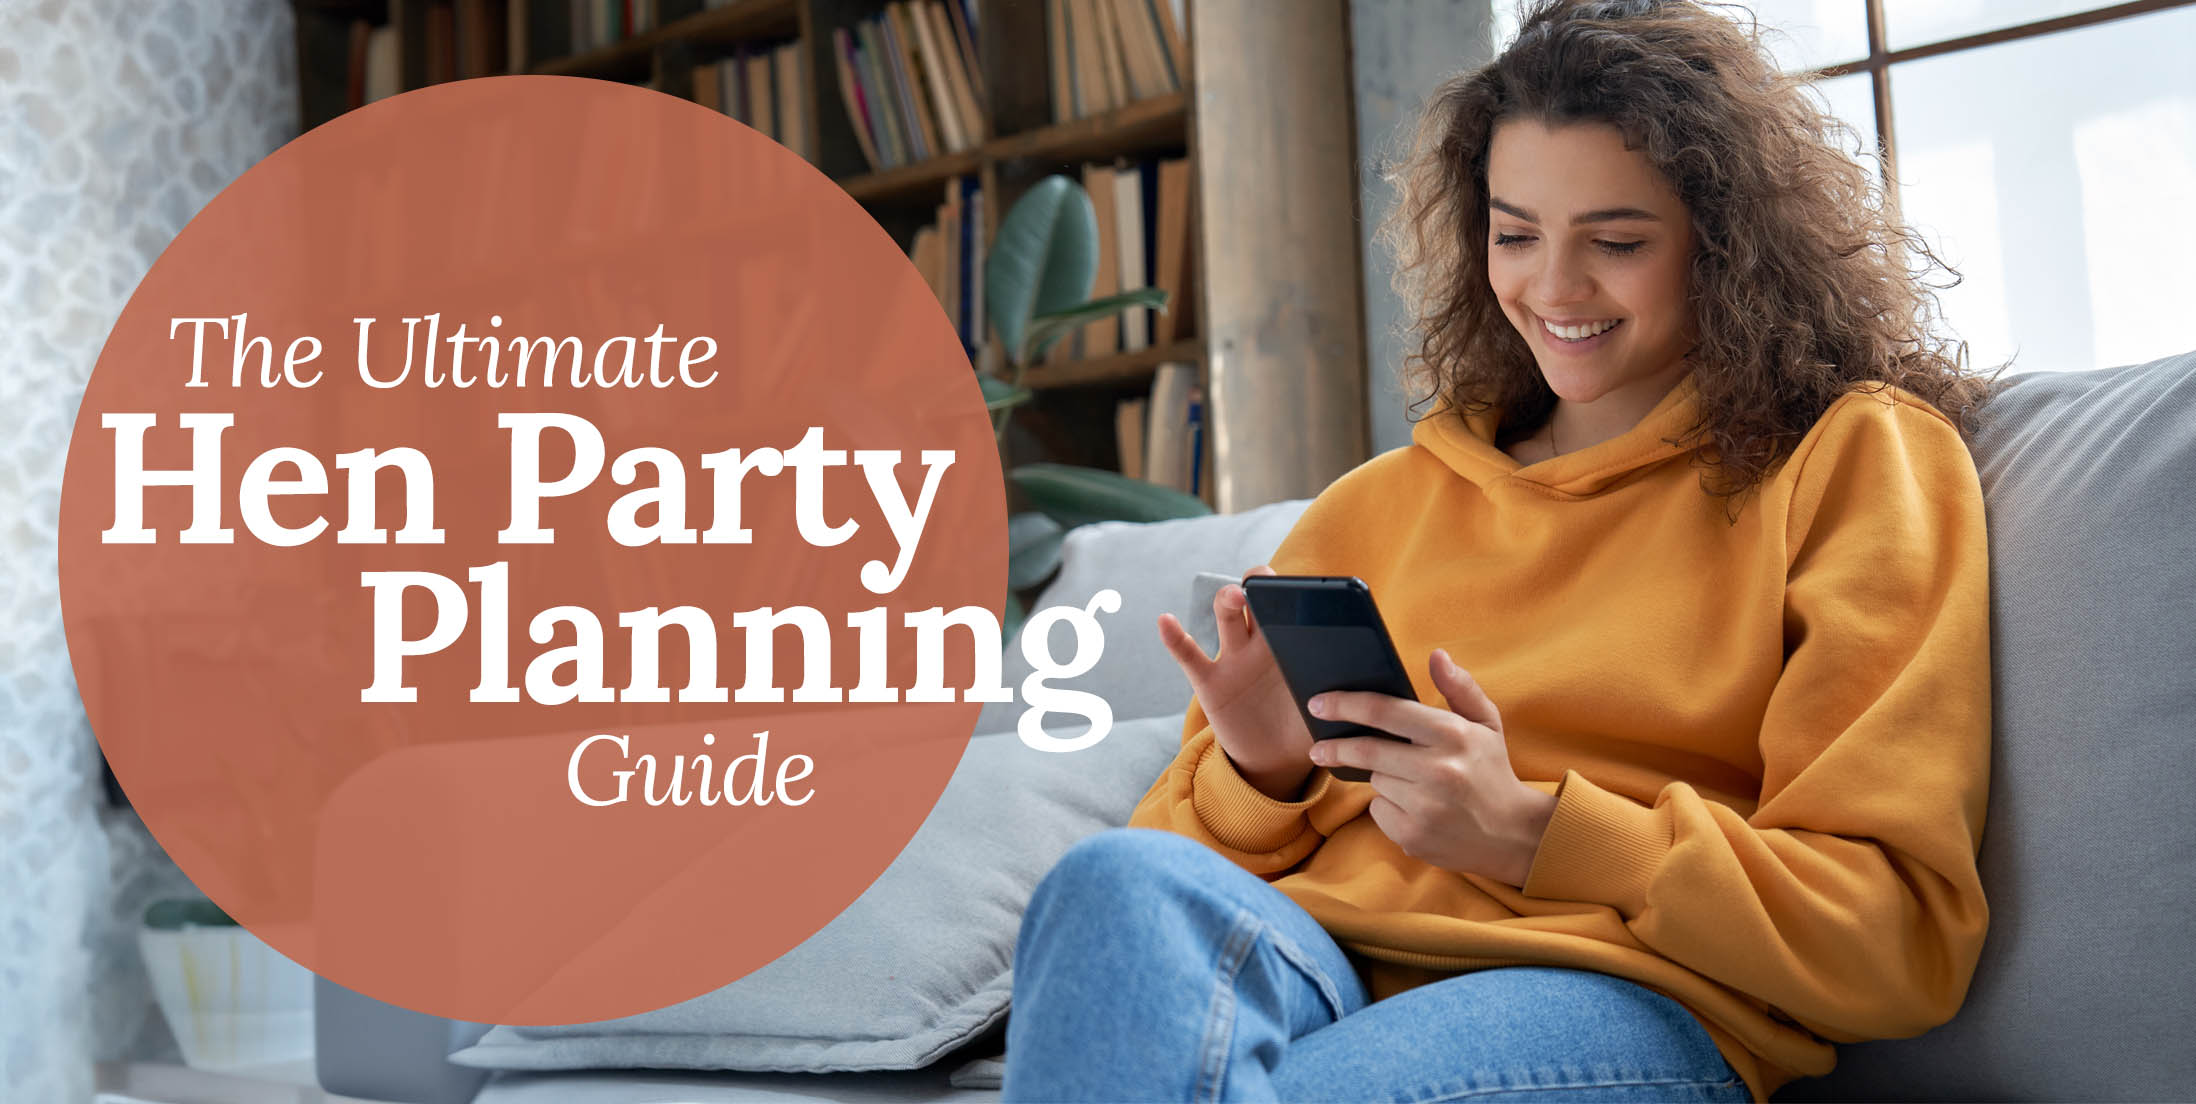 The Ultimate Hen Party Planning Guide by Life Drawing Hen Parties